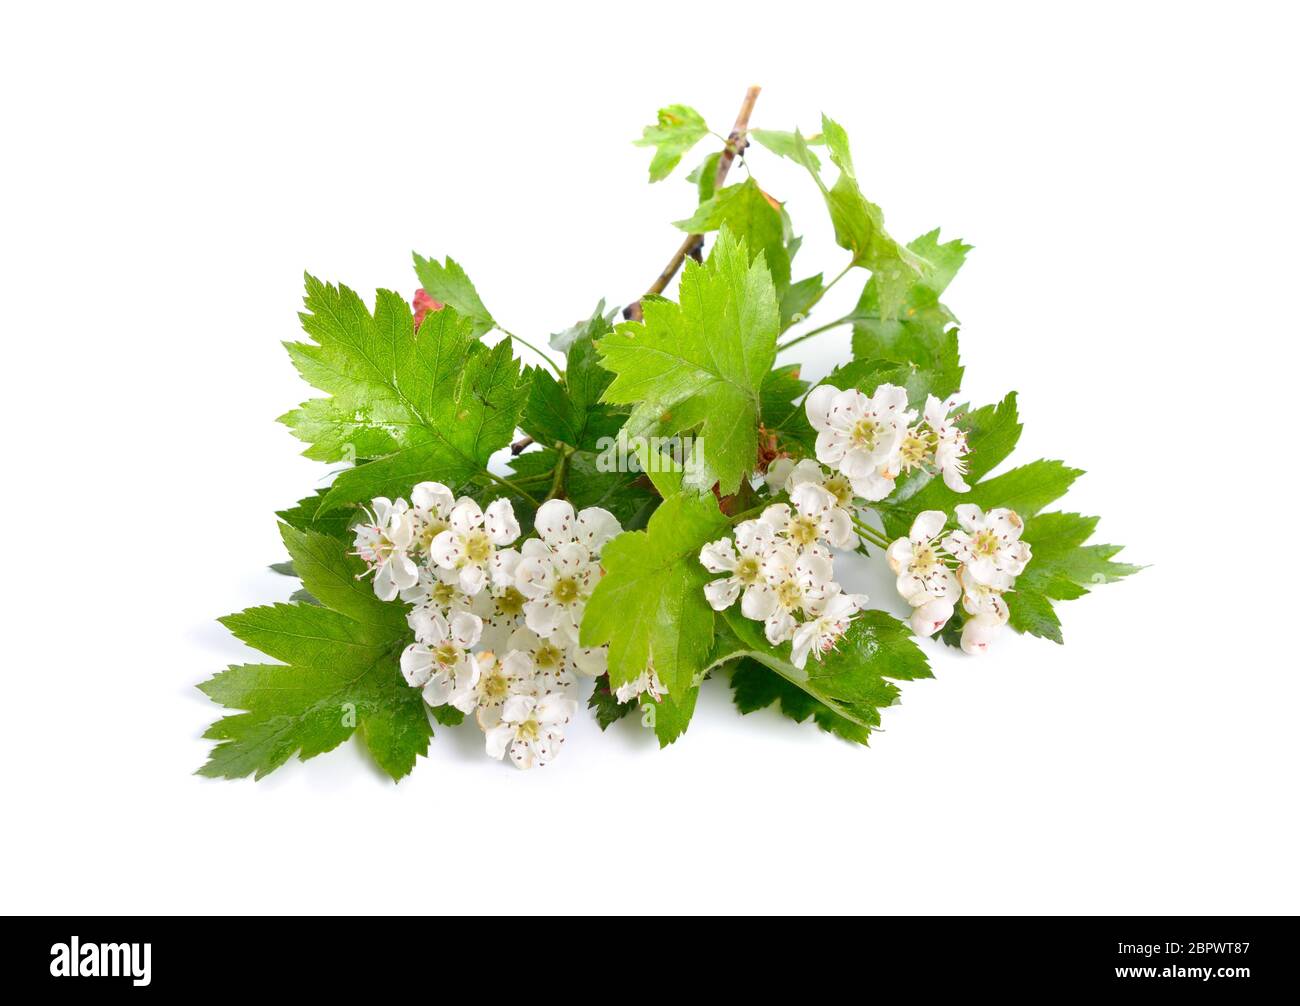 Flowers Crataegus hawthorn quickthorn thornapple May-tree, whitethorn or hawberry. Isolated Stock Photo